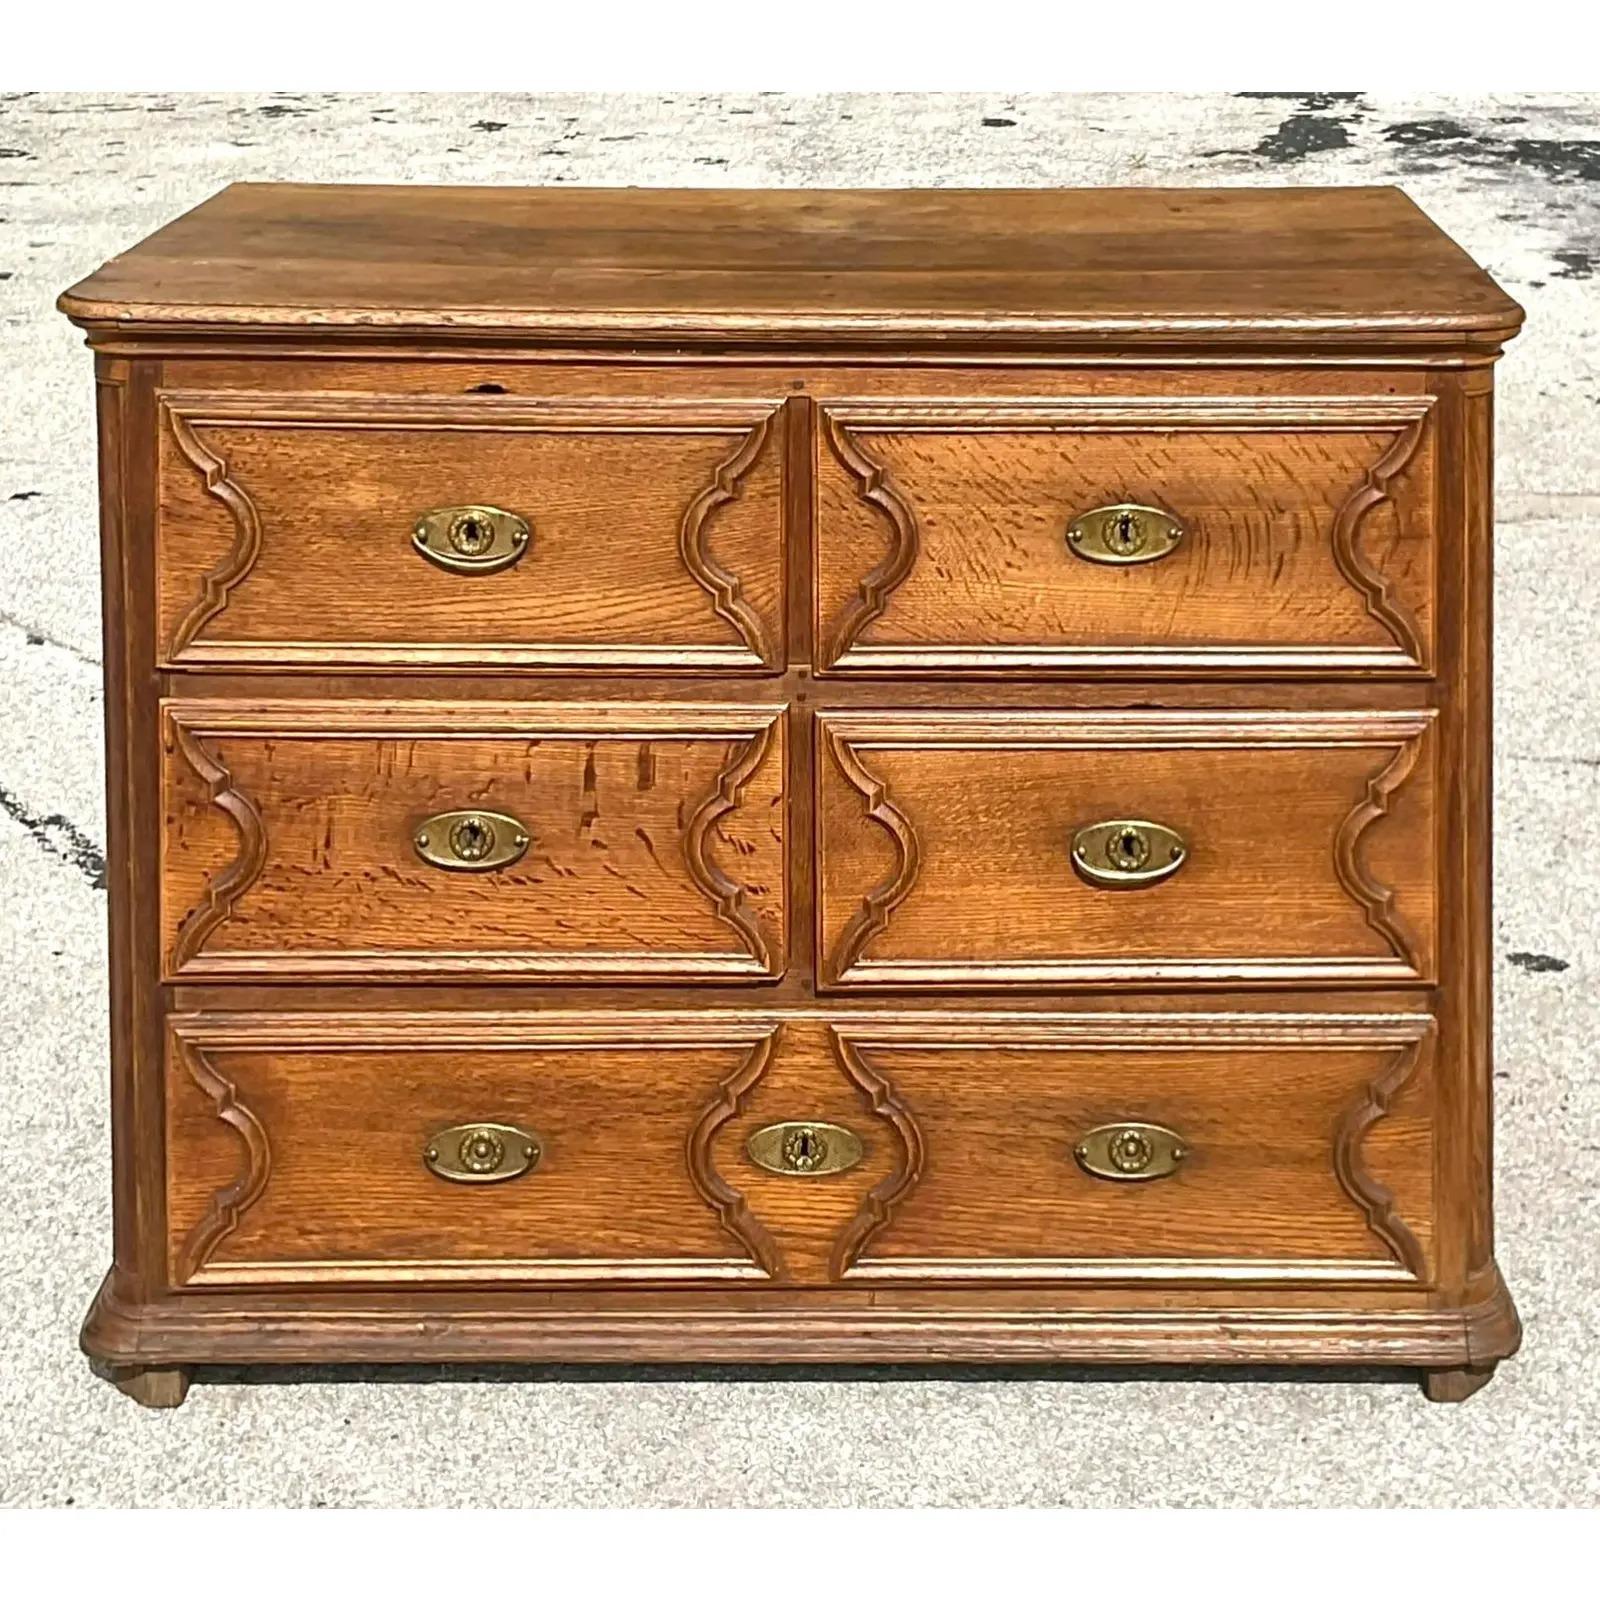 Vintage Boho English Georgian Gentlemen’s Chest of Drawers In Good Condition For Sale In west palm beach, FL